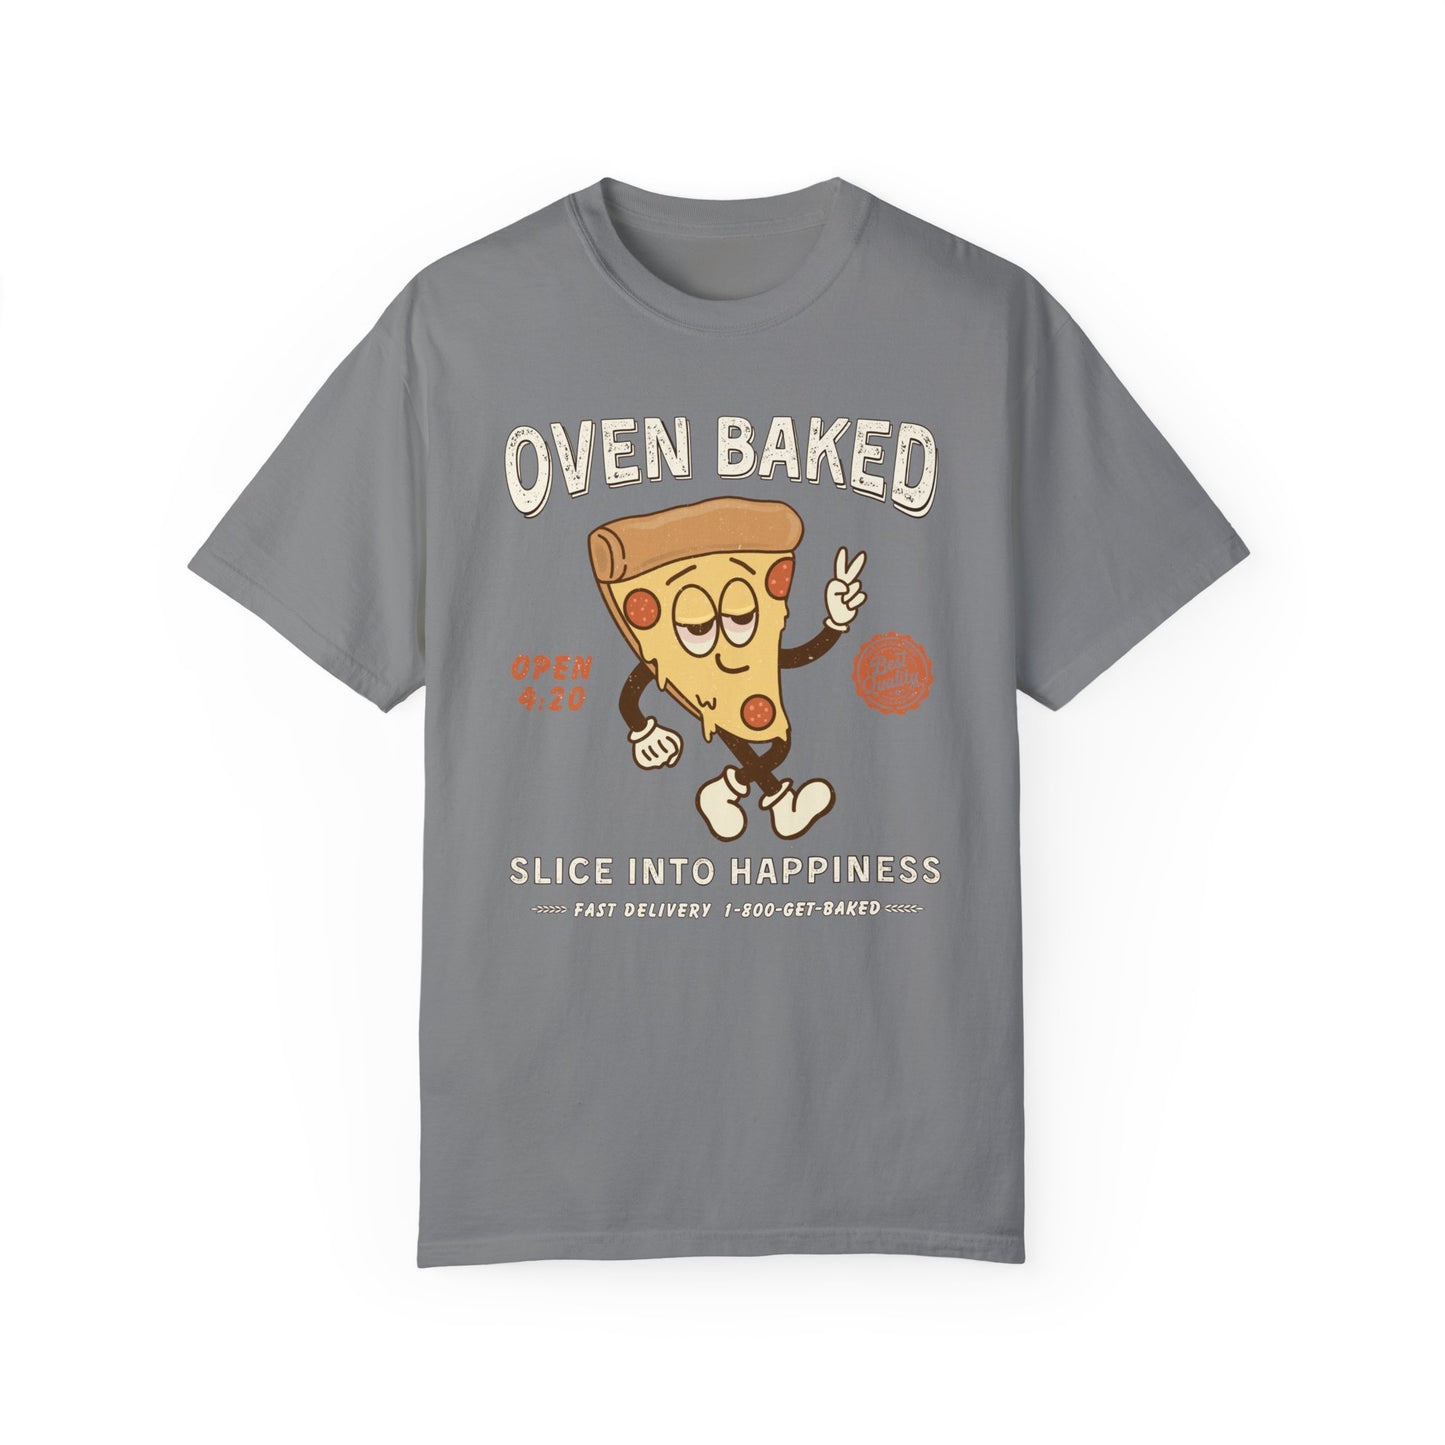 Oven Baked 420 Pizza Tee